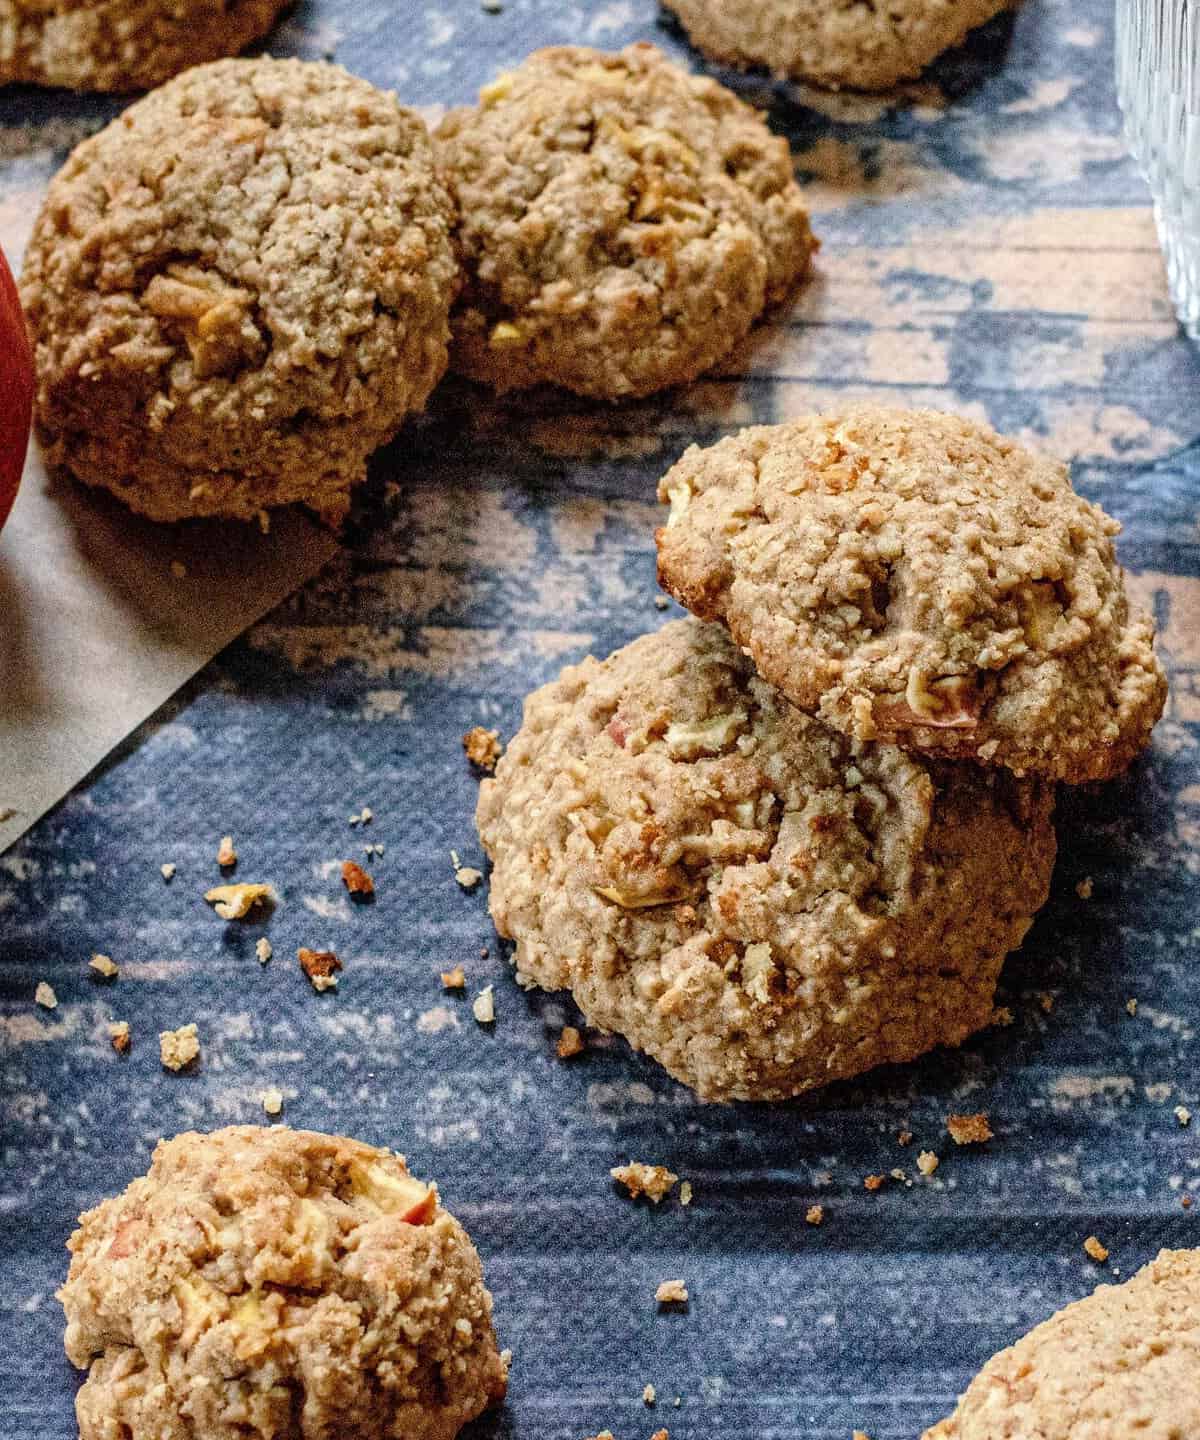  Warm, delicious Oatmeal Apple Cookies fresh out of the oven!